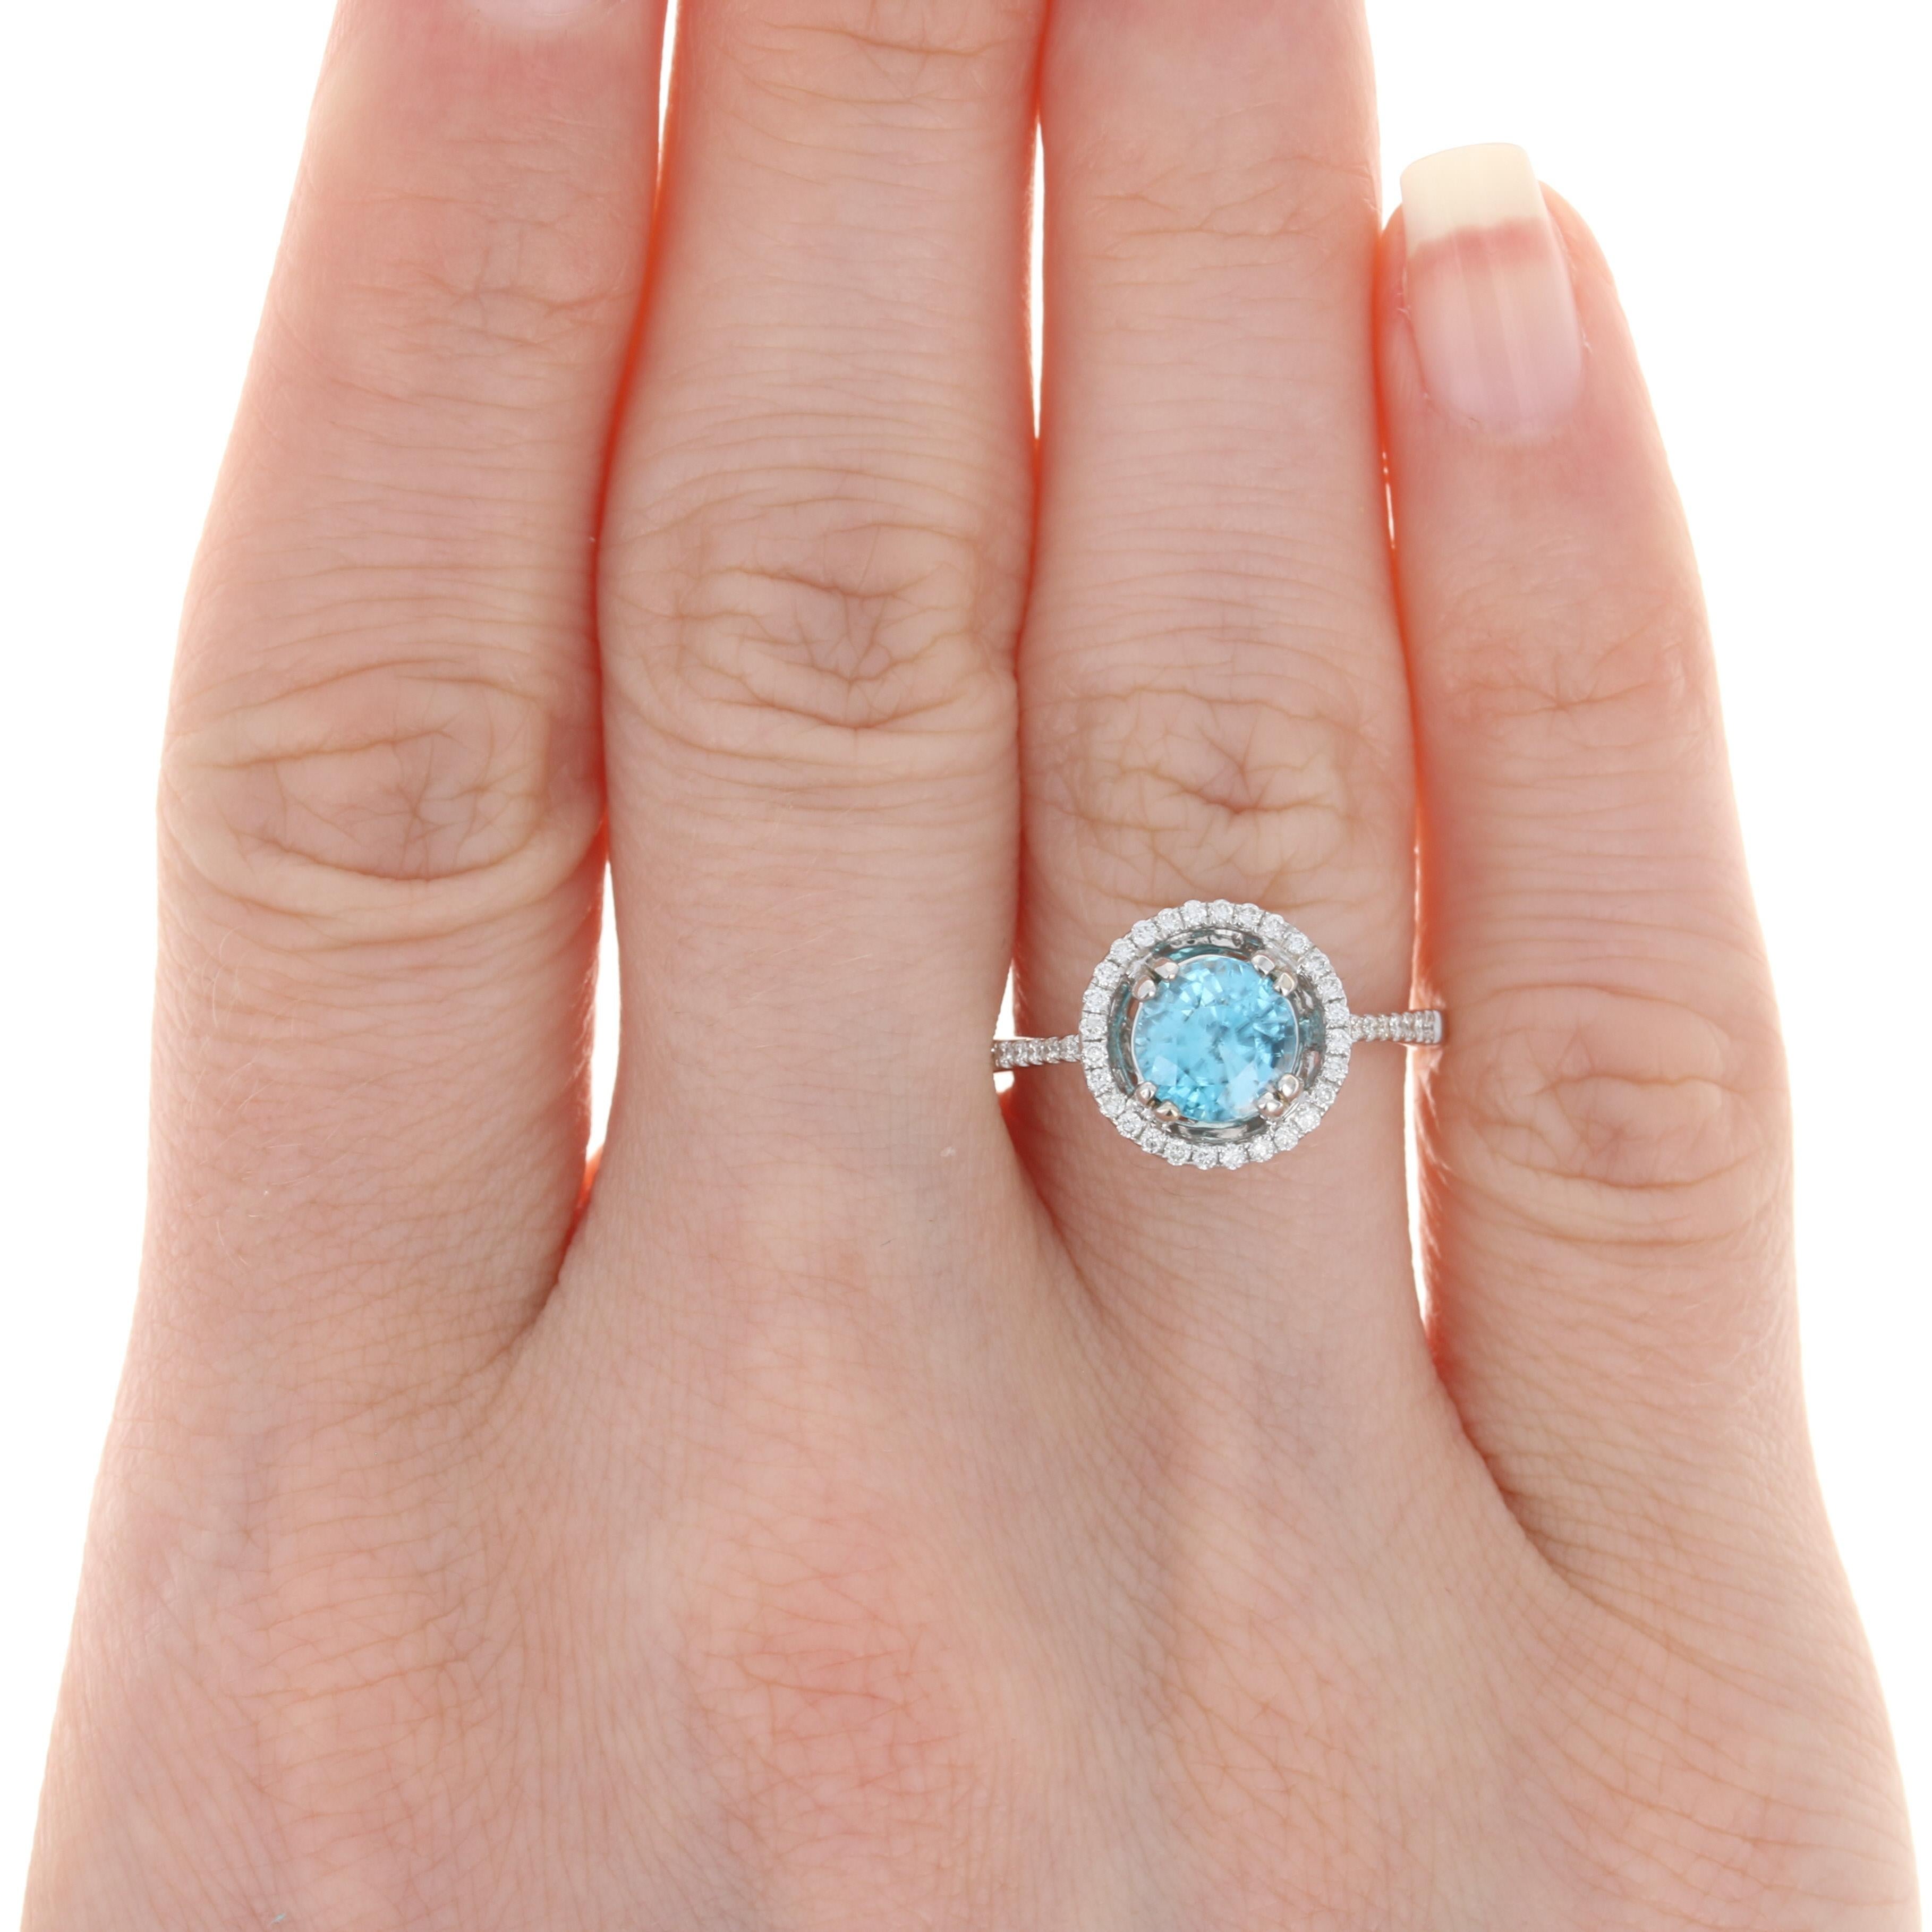 Your quest for the perfect birthday or anniversary gift ends here with this gorgeous ring! Fashioned in popular 14k white gold, this NEW piece features a blue zircon solitaire framed in a halo of sparkling diamonds. More diamond accents adorn